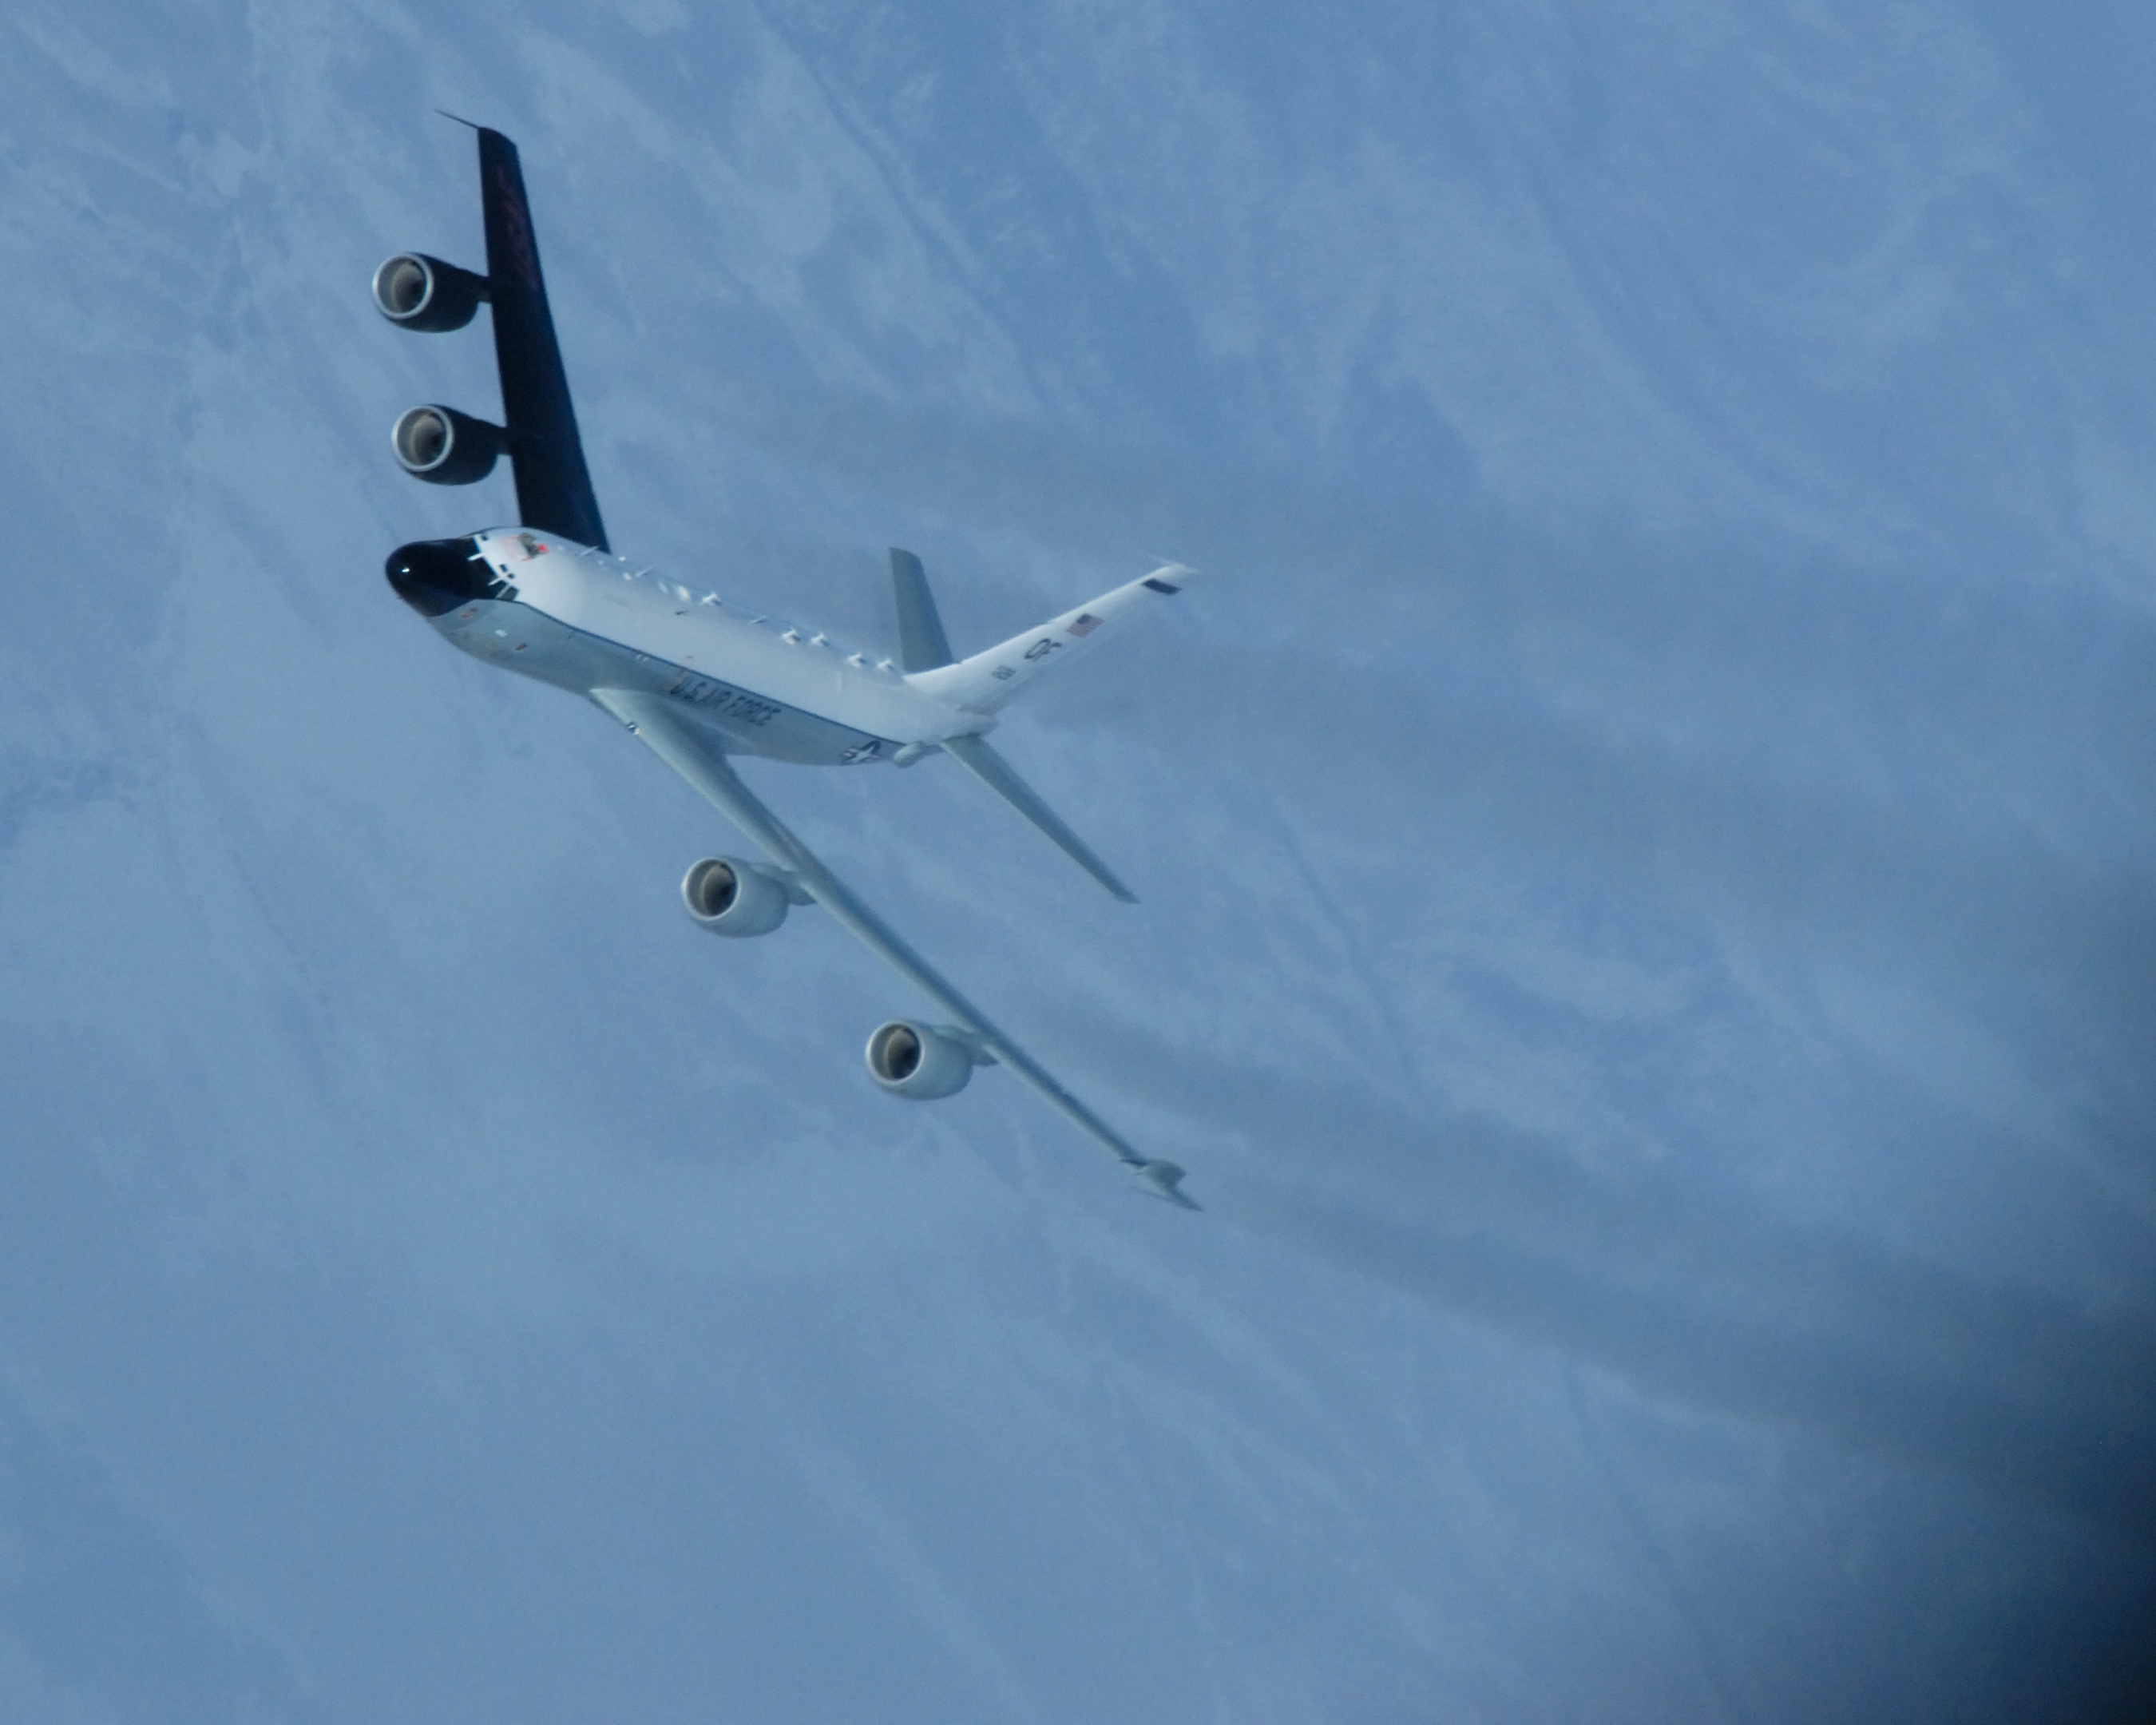 A U.S. Air Force RC-135S Cobra Ball, which is designed to detect ballistic missile launches, was tracked near North Korea amid concerns the North could be preparing a new missile launch. (Master Sgt. Robert Wieland–U.S. Air Force photo)